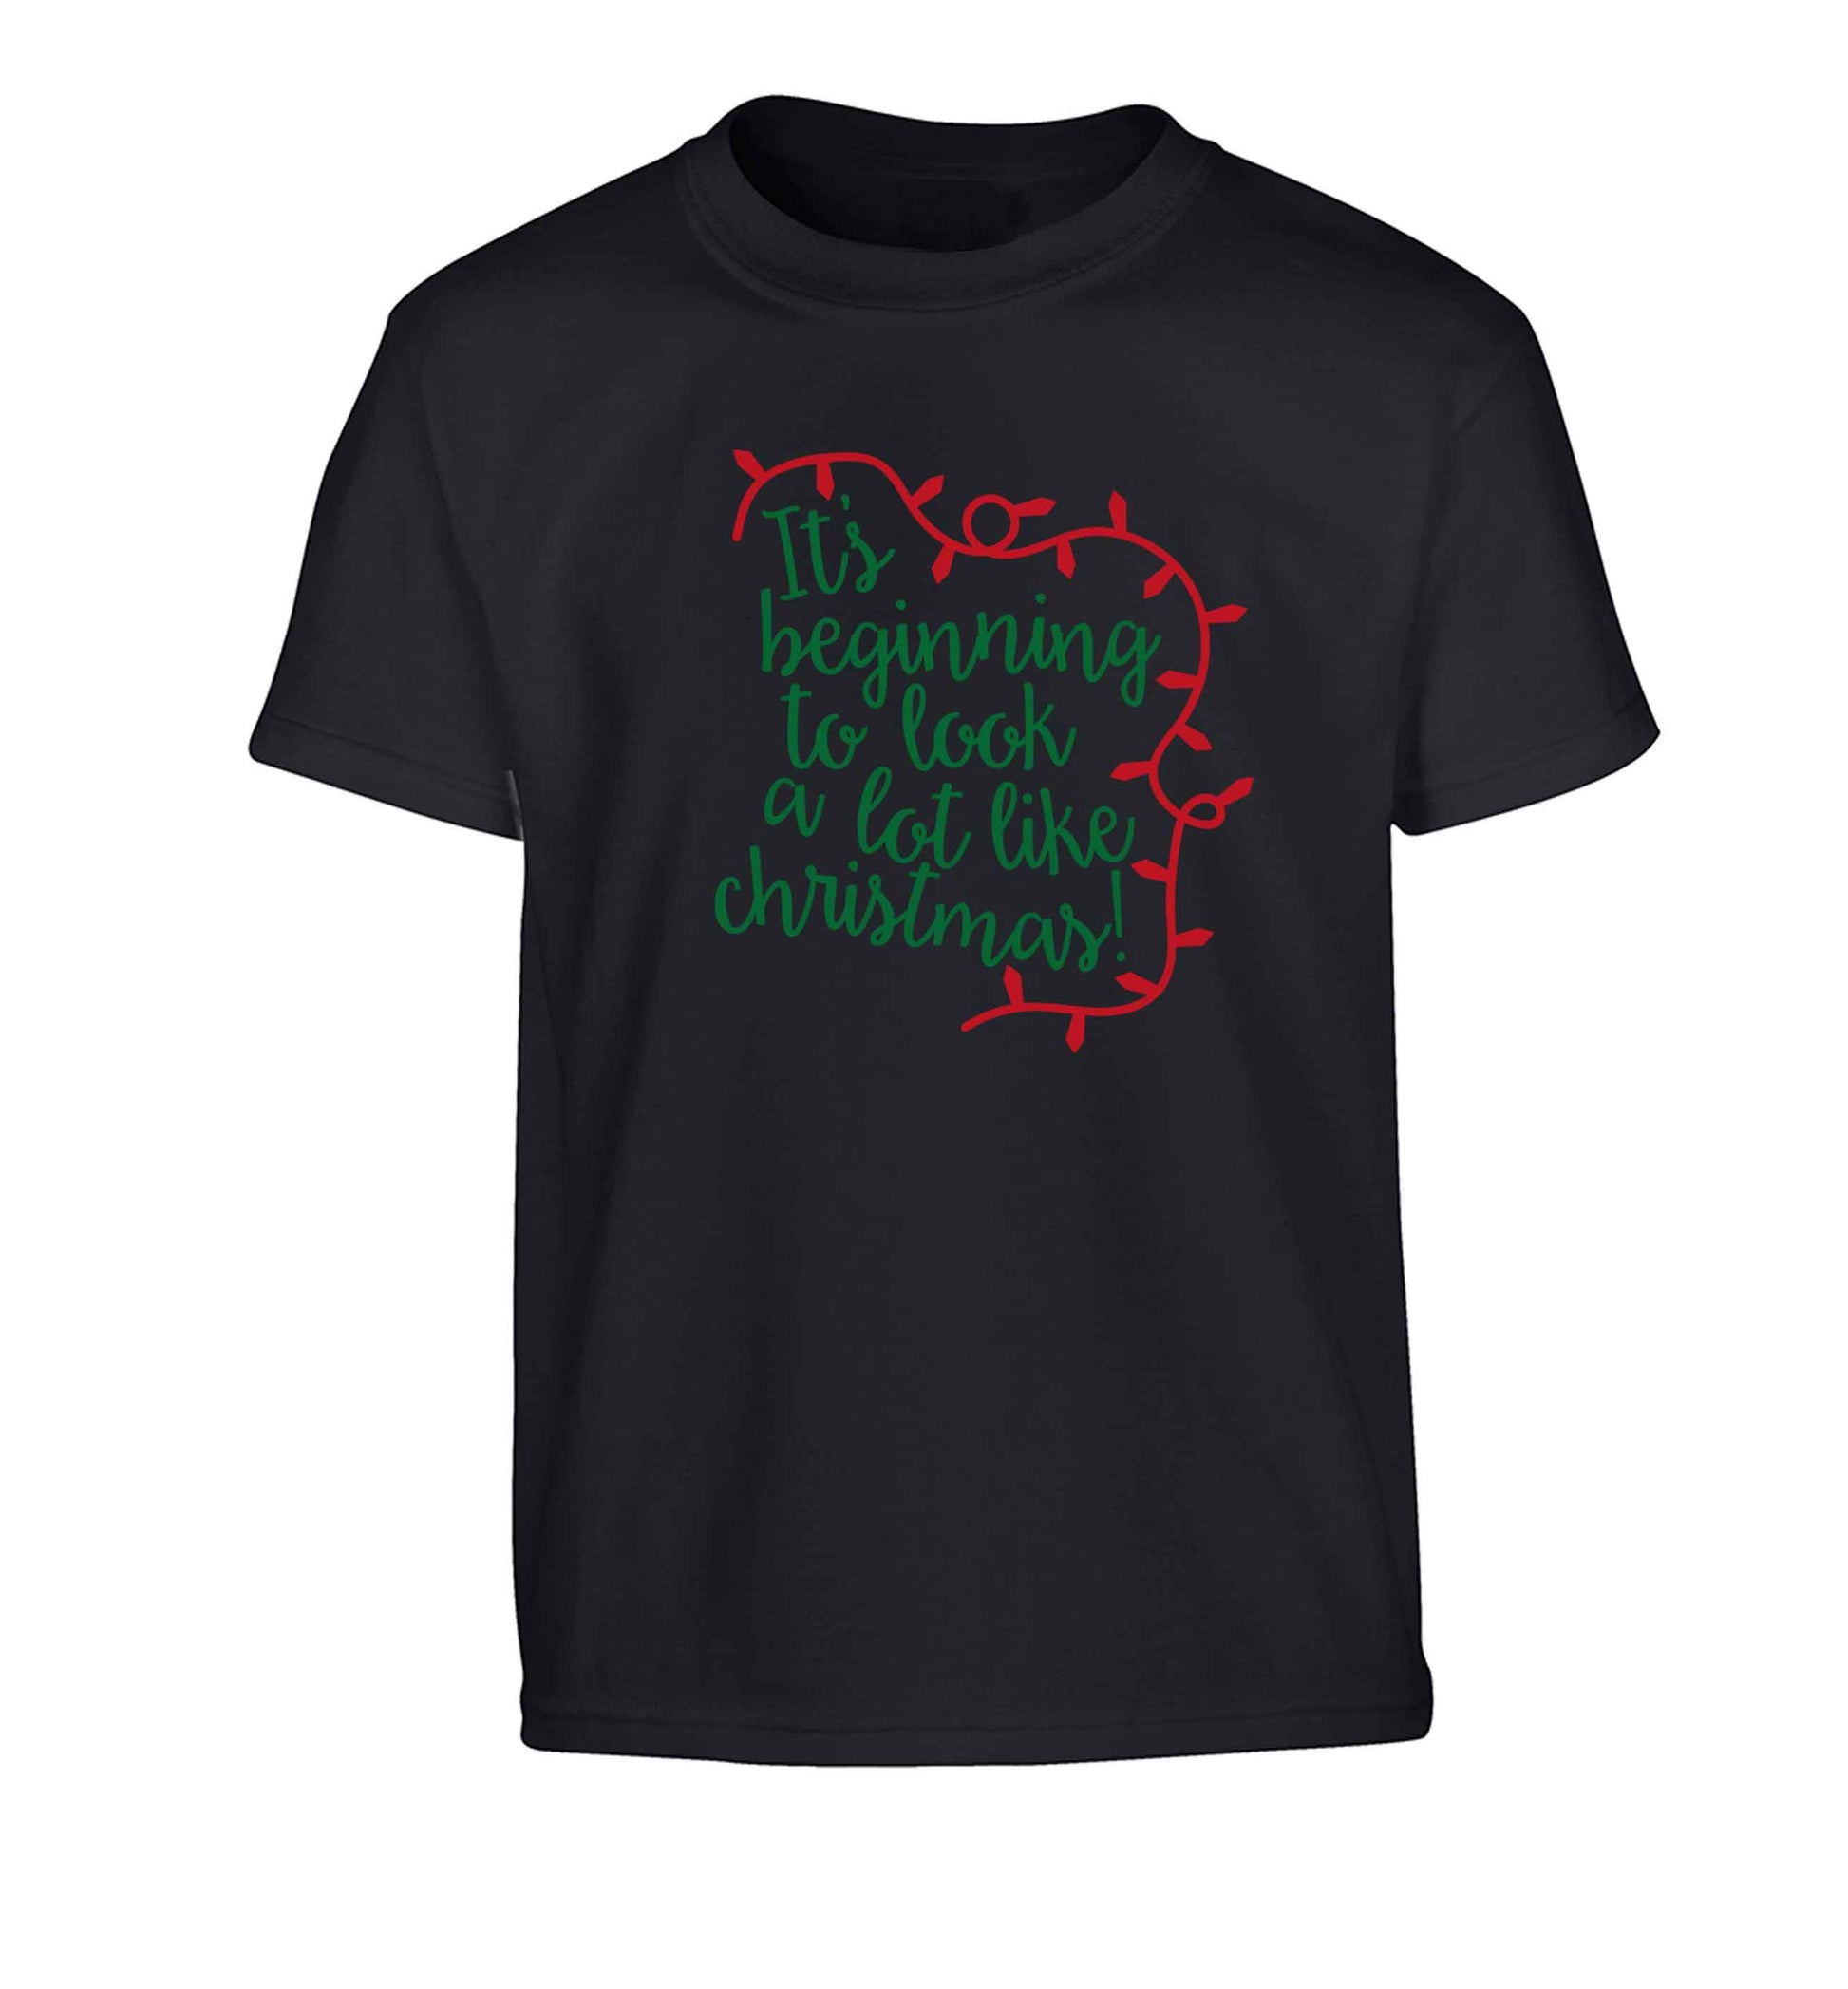 It's beginning to look a lot like Christmas Children's black Tshirt 12-13 Years